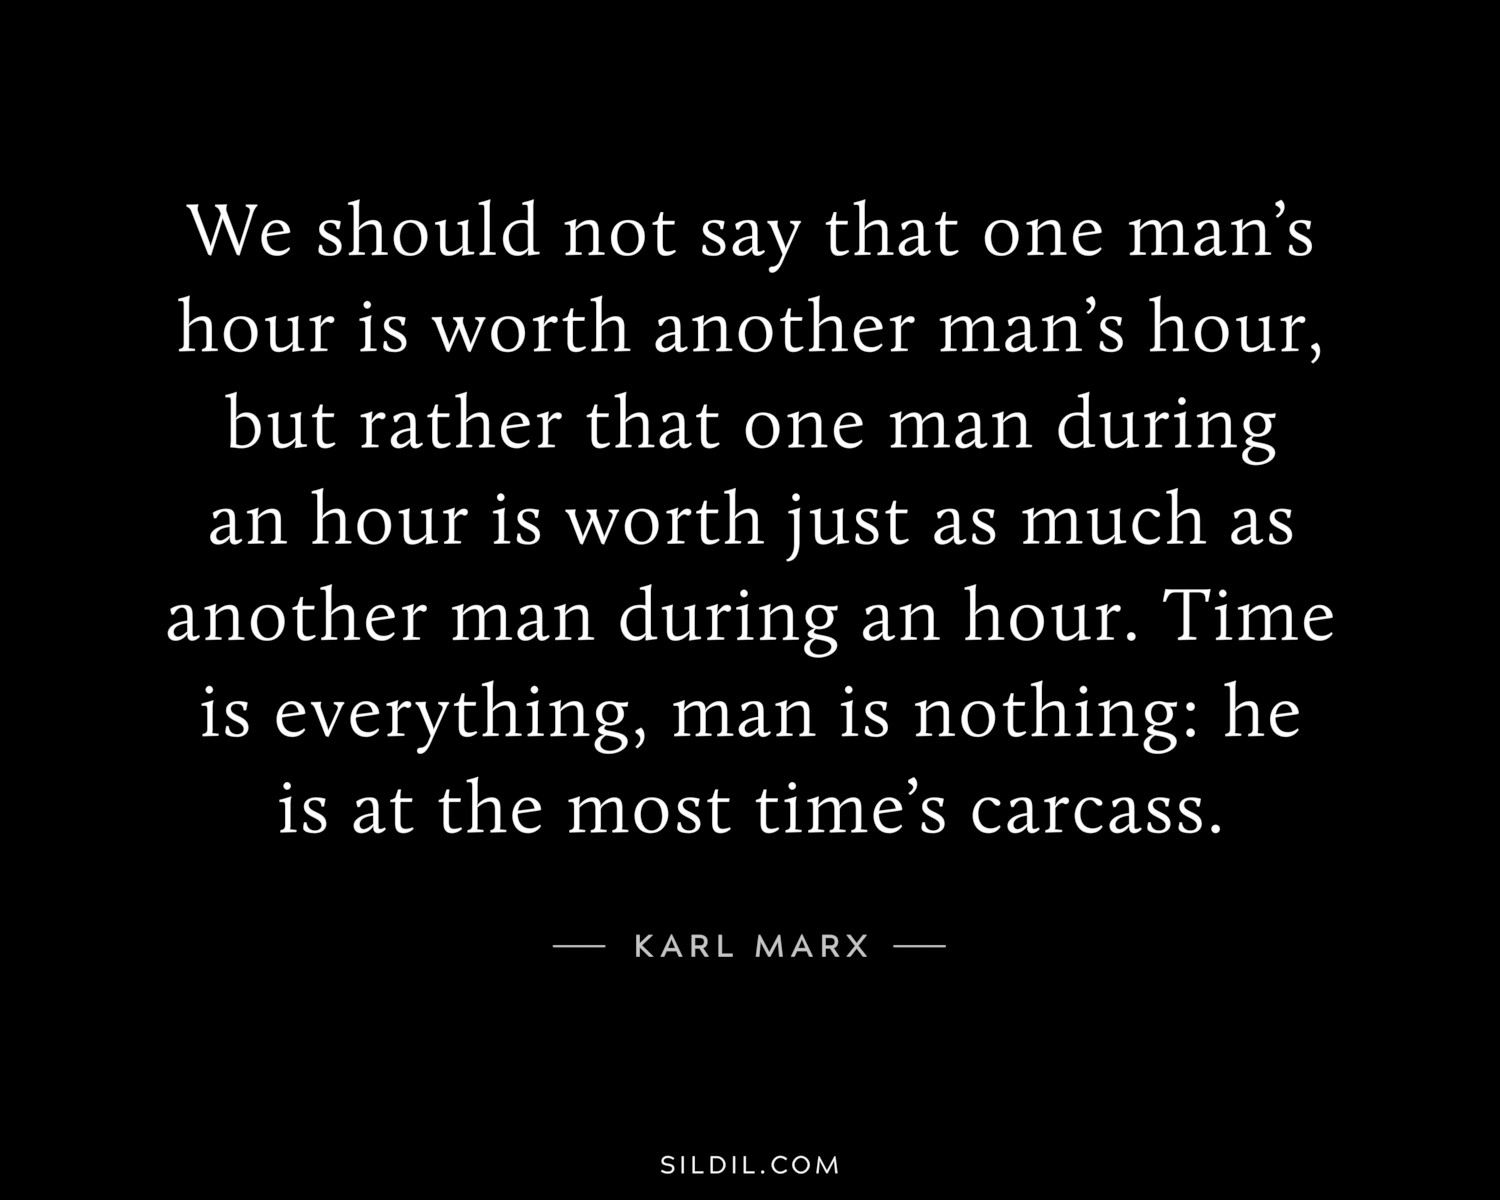 We should not say that one man’s hour is worth another man’s hour, but rather that one man during an hour is worth just as much as another man during an hour. Time is everything, man is nothing: he is at the most time’s carcass.